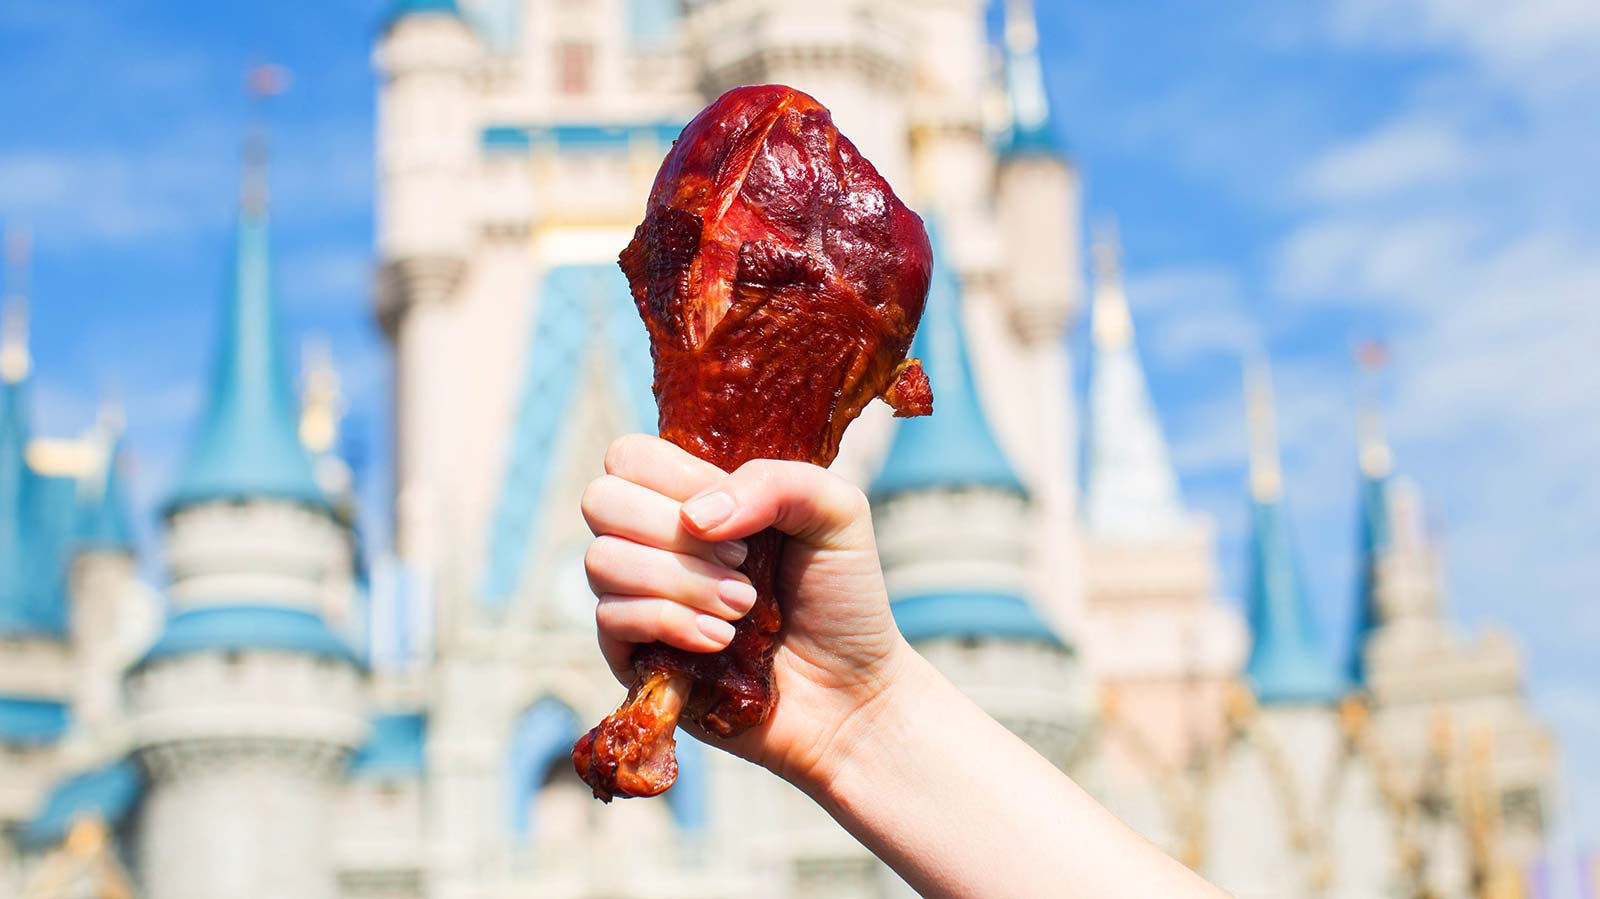 🍖 Can We Guess Your Age and Gender Based on the Meats You’ve Eaten? Smoked Turkey Leg